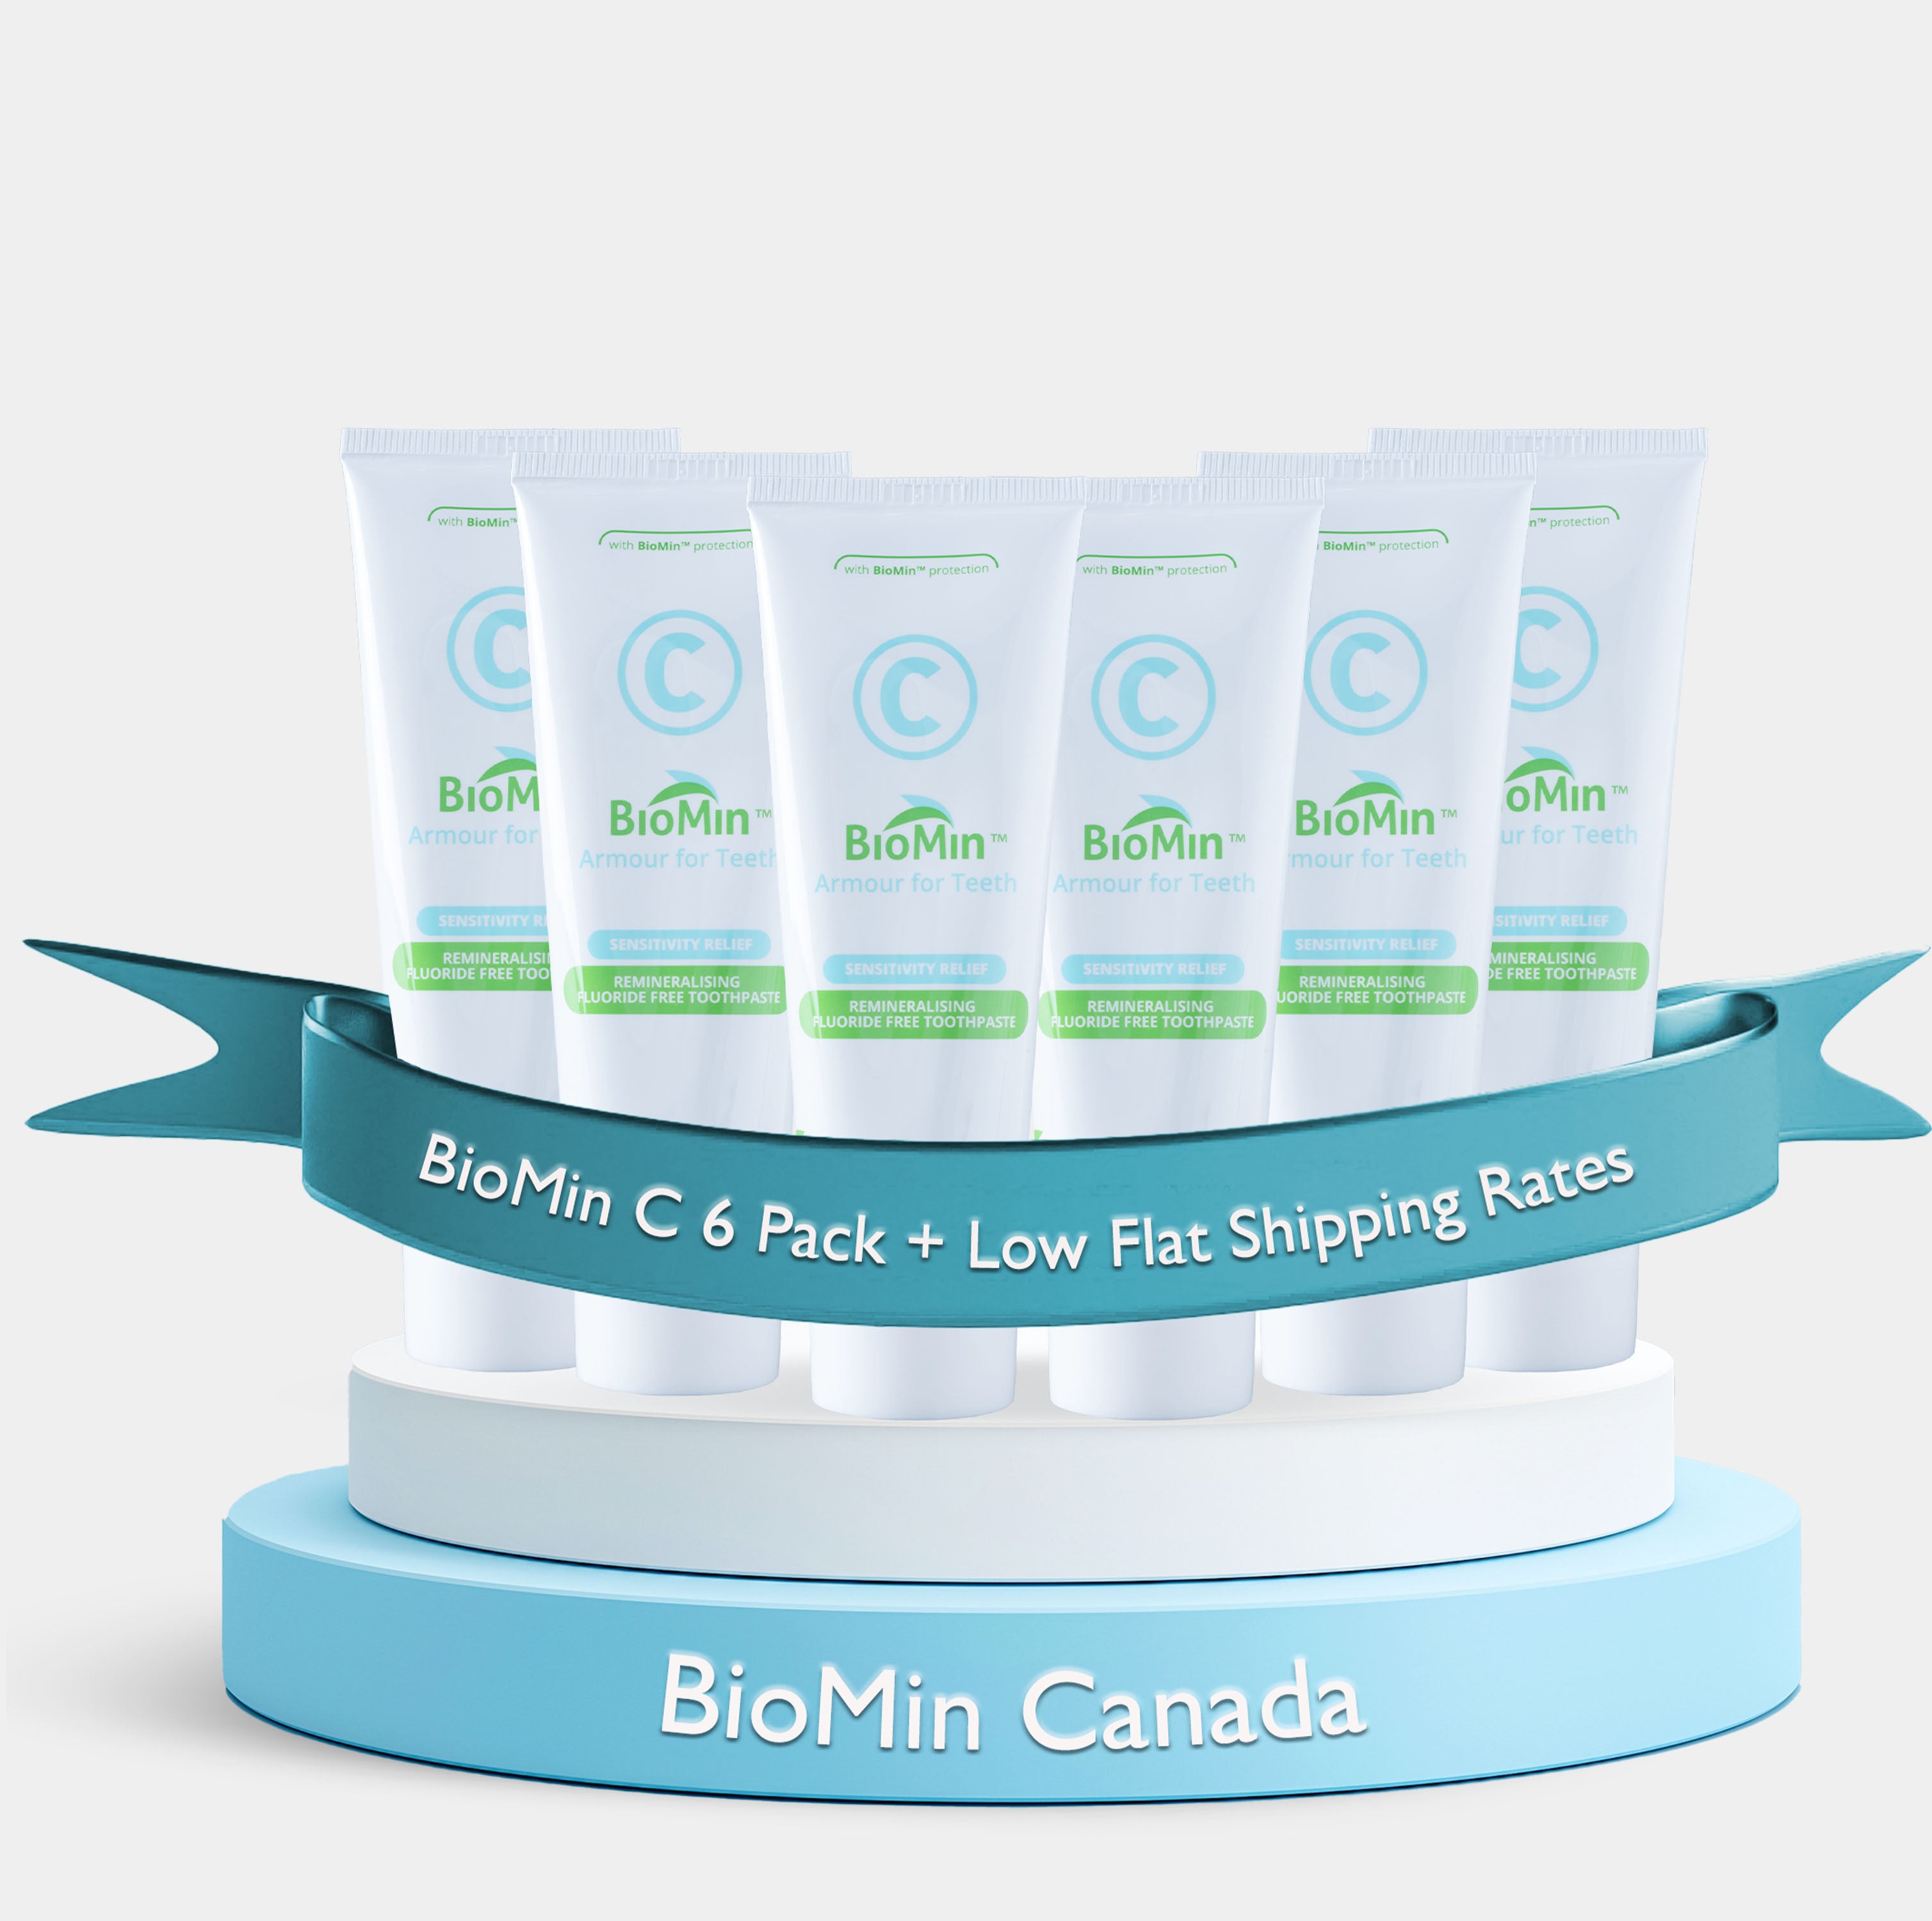 BioMin C 6 Pack + Low Flat Shipping Rates